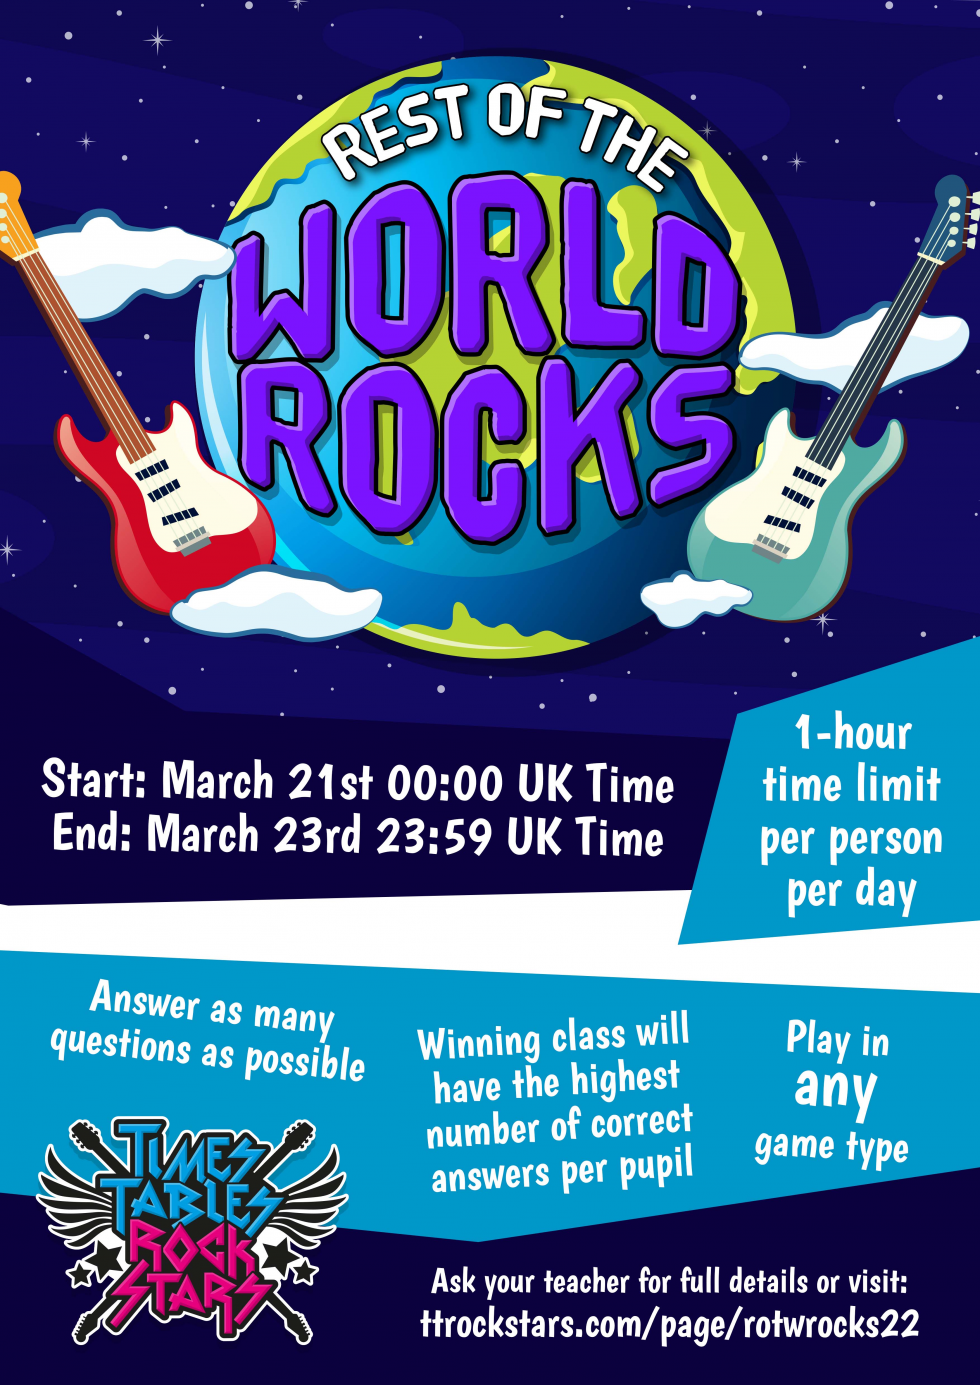 Download your Rest of the World Rocks 2022 Poster now.